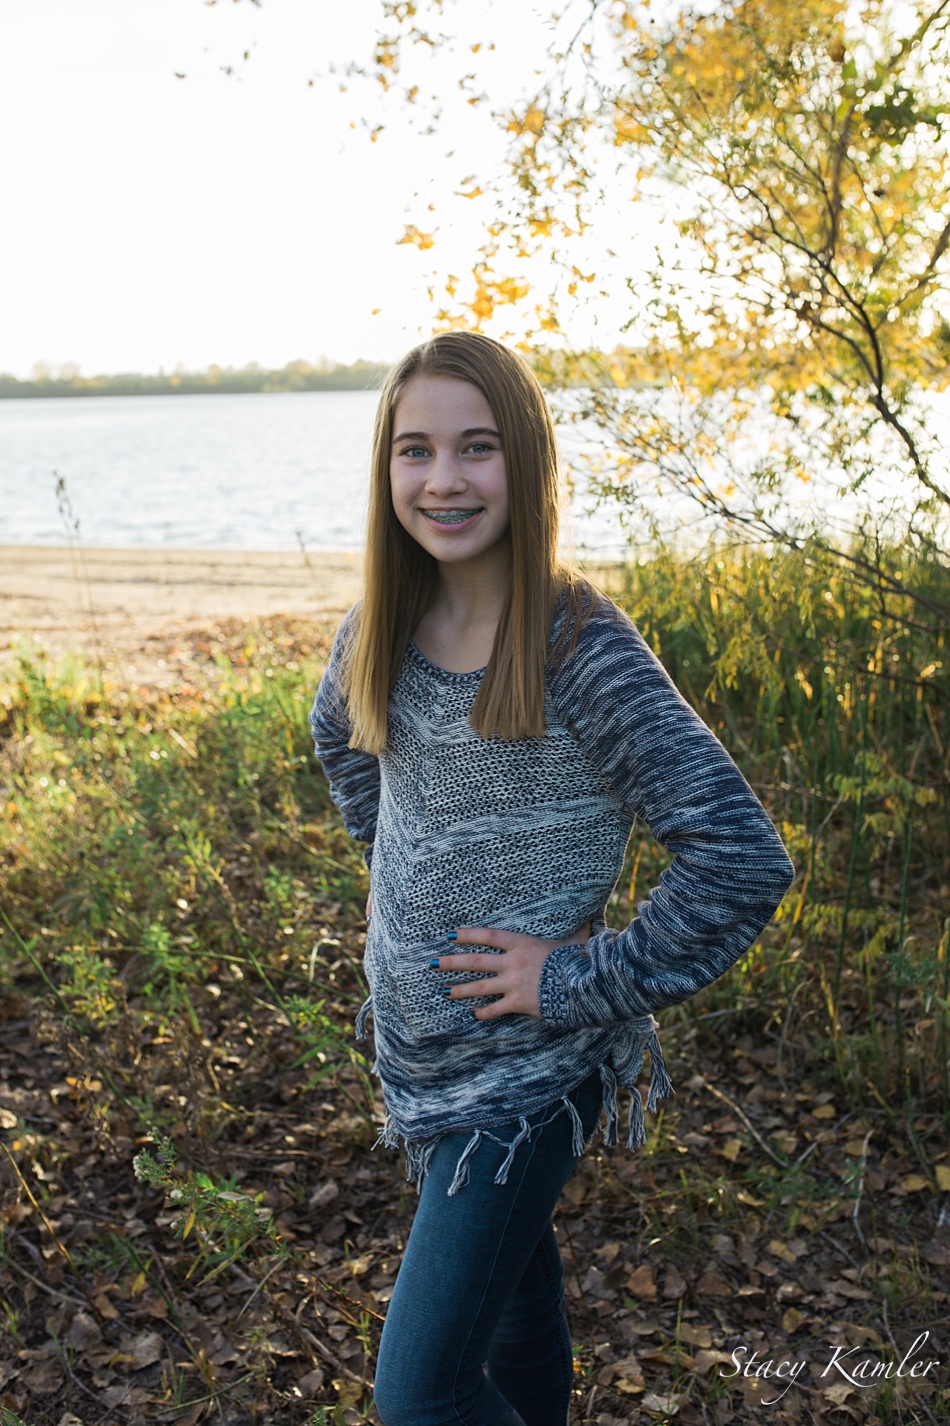 Beautiful teenager portraits by the lake at Golden Hour